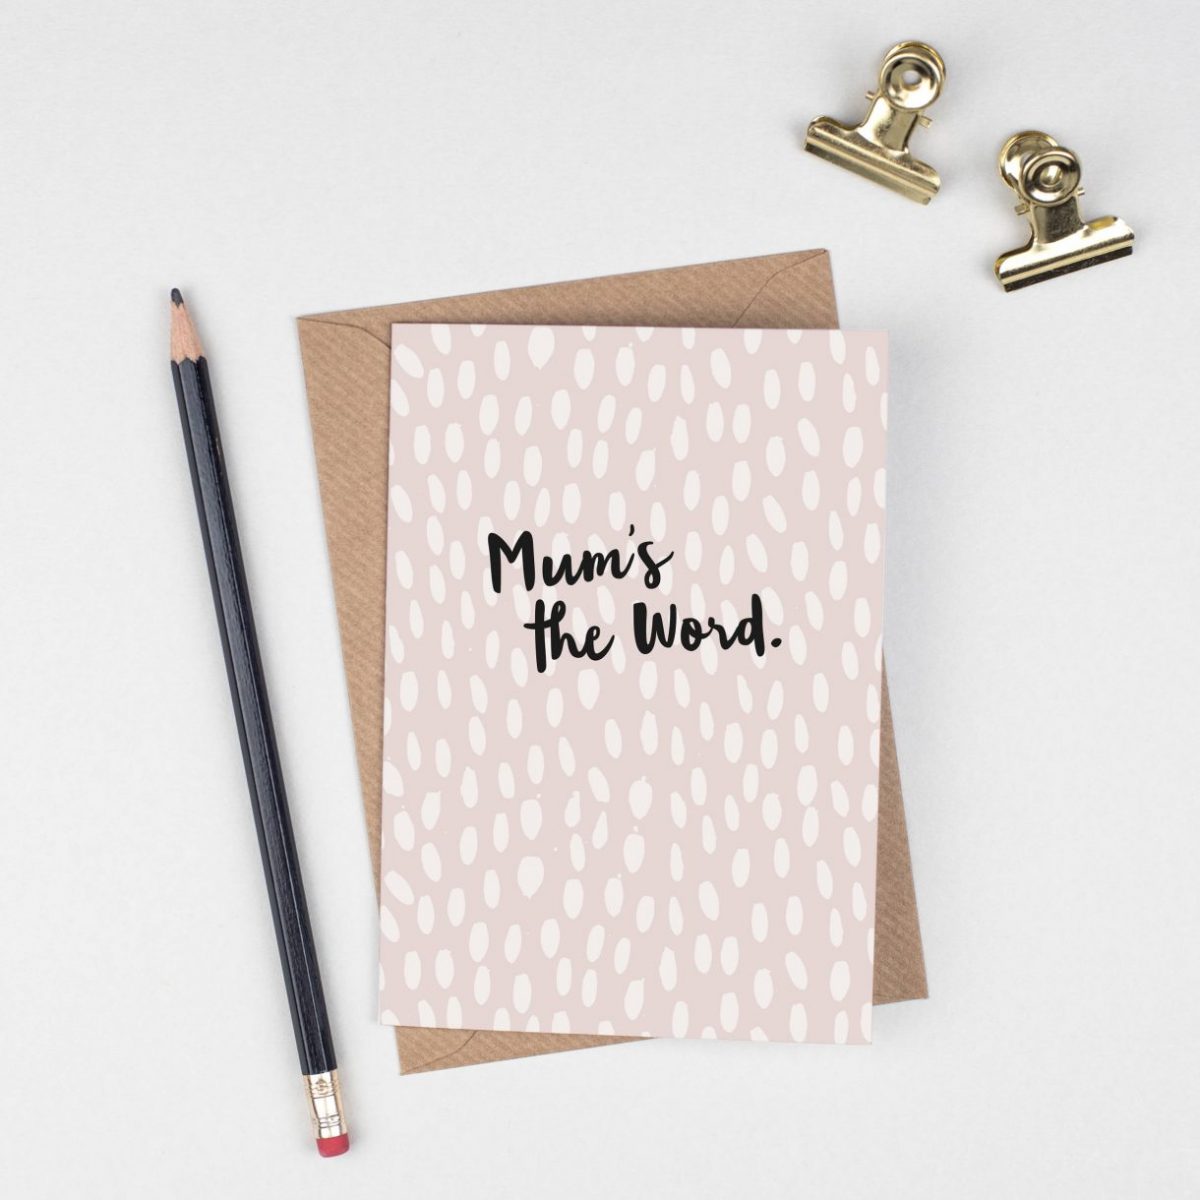 Mothers Day Card Funny, Birthday Card for Mum, Mums the Word, New Mum card, Inspirational Quote, New Baby Card, Love Mum, Mothers Day Gift